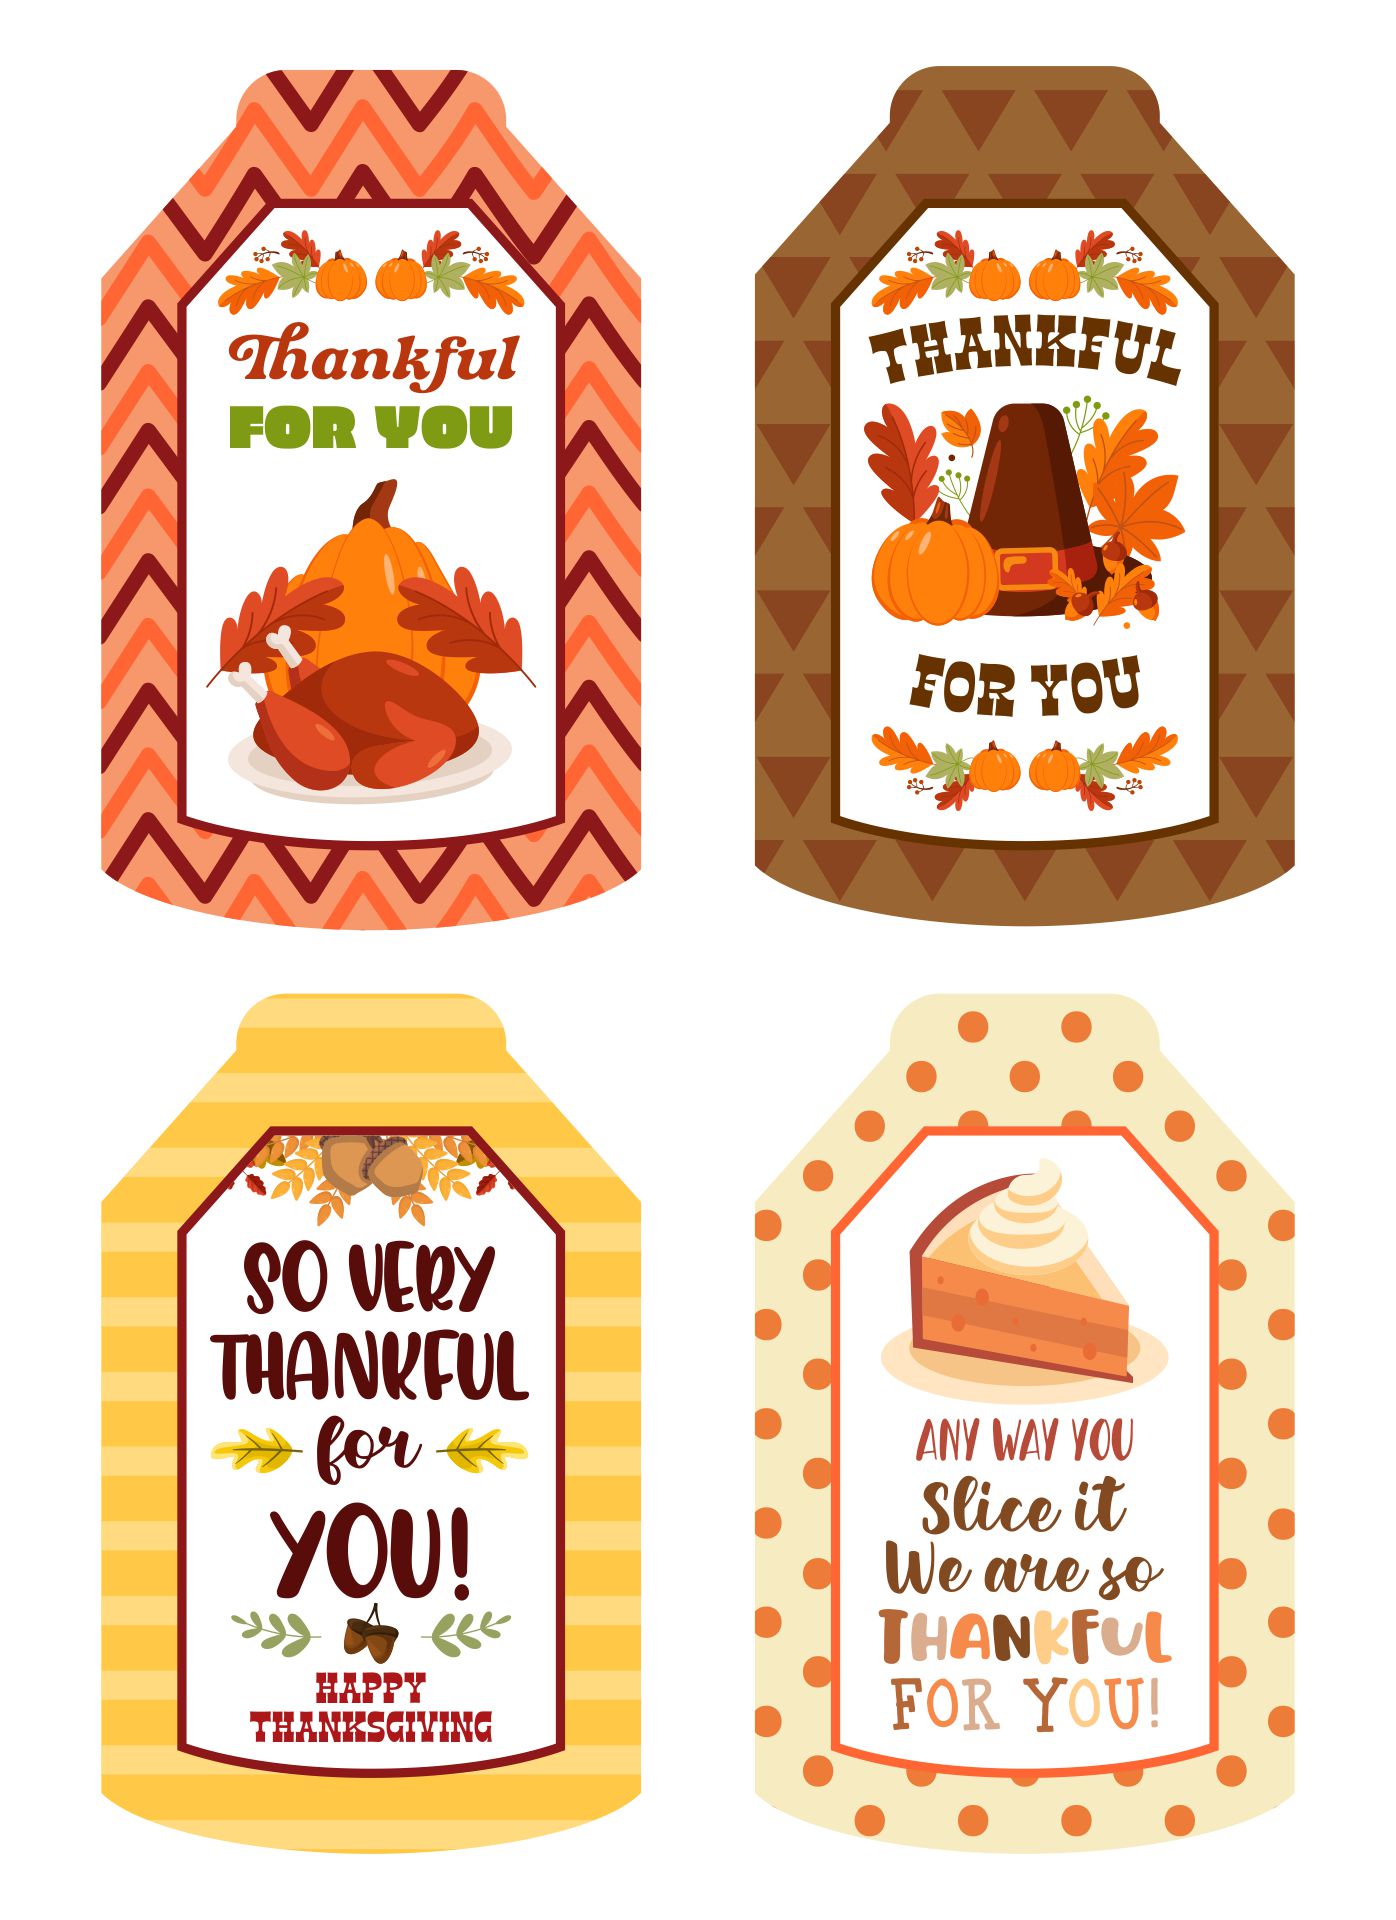 Thankful for You Gifts Ideas for Thanksgiving